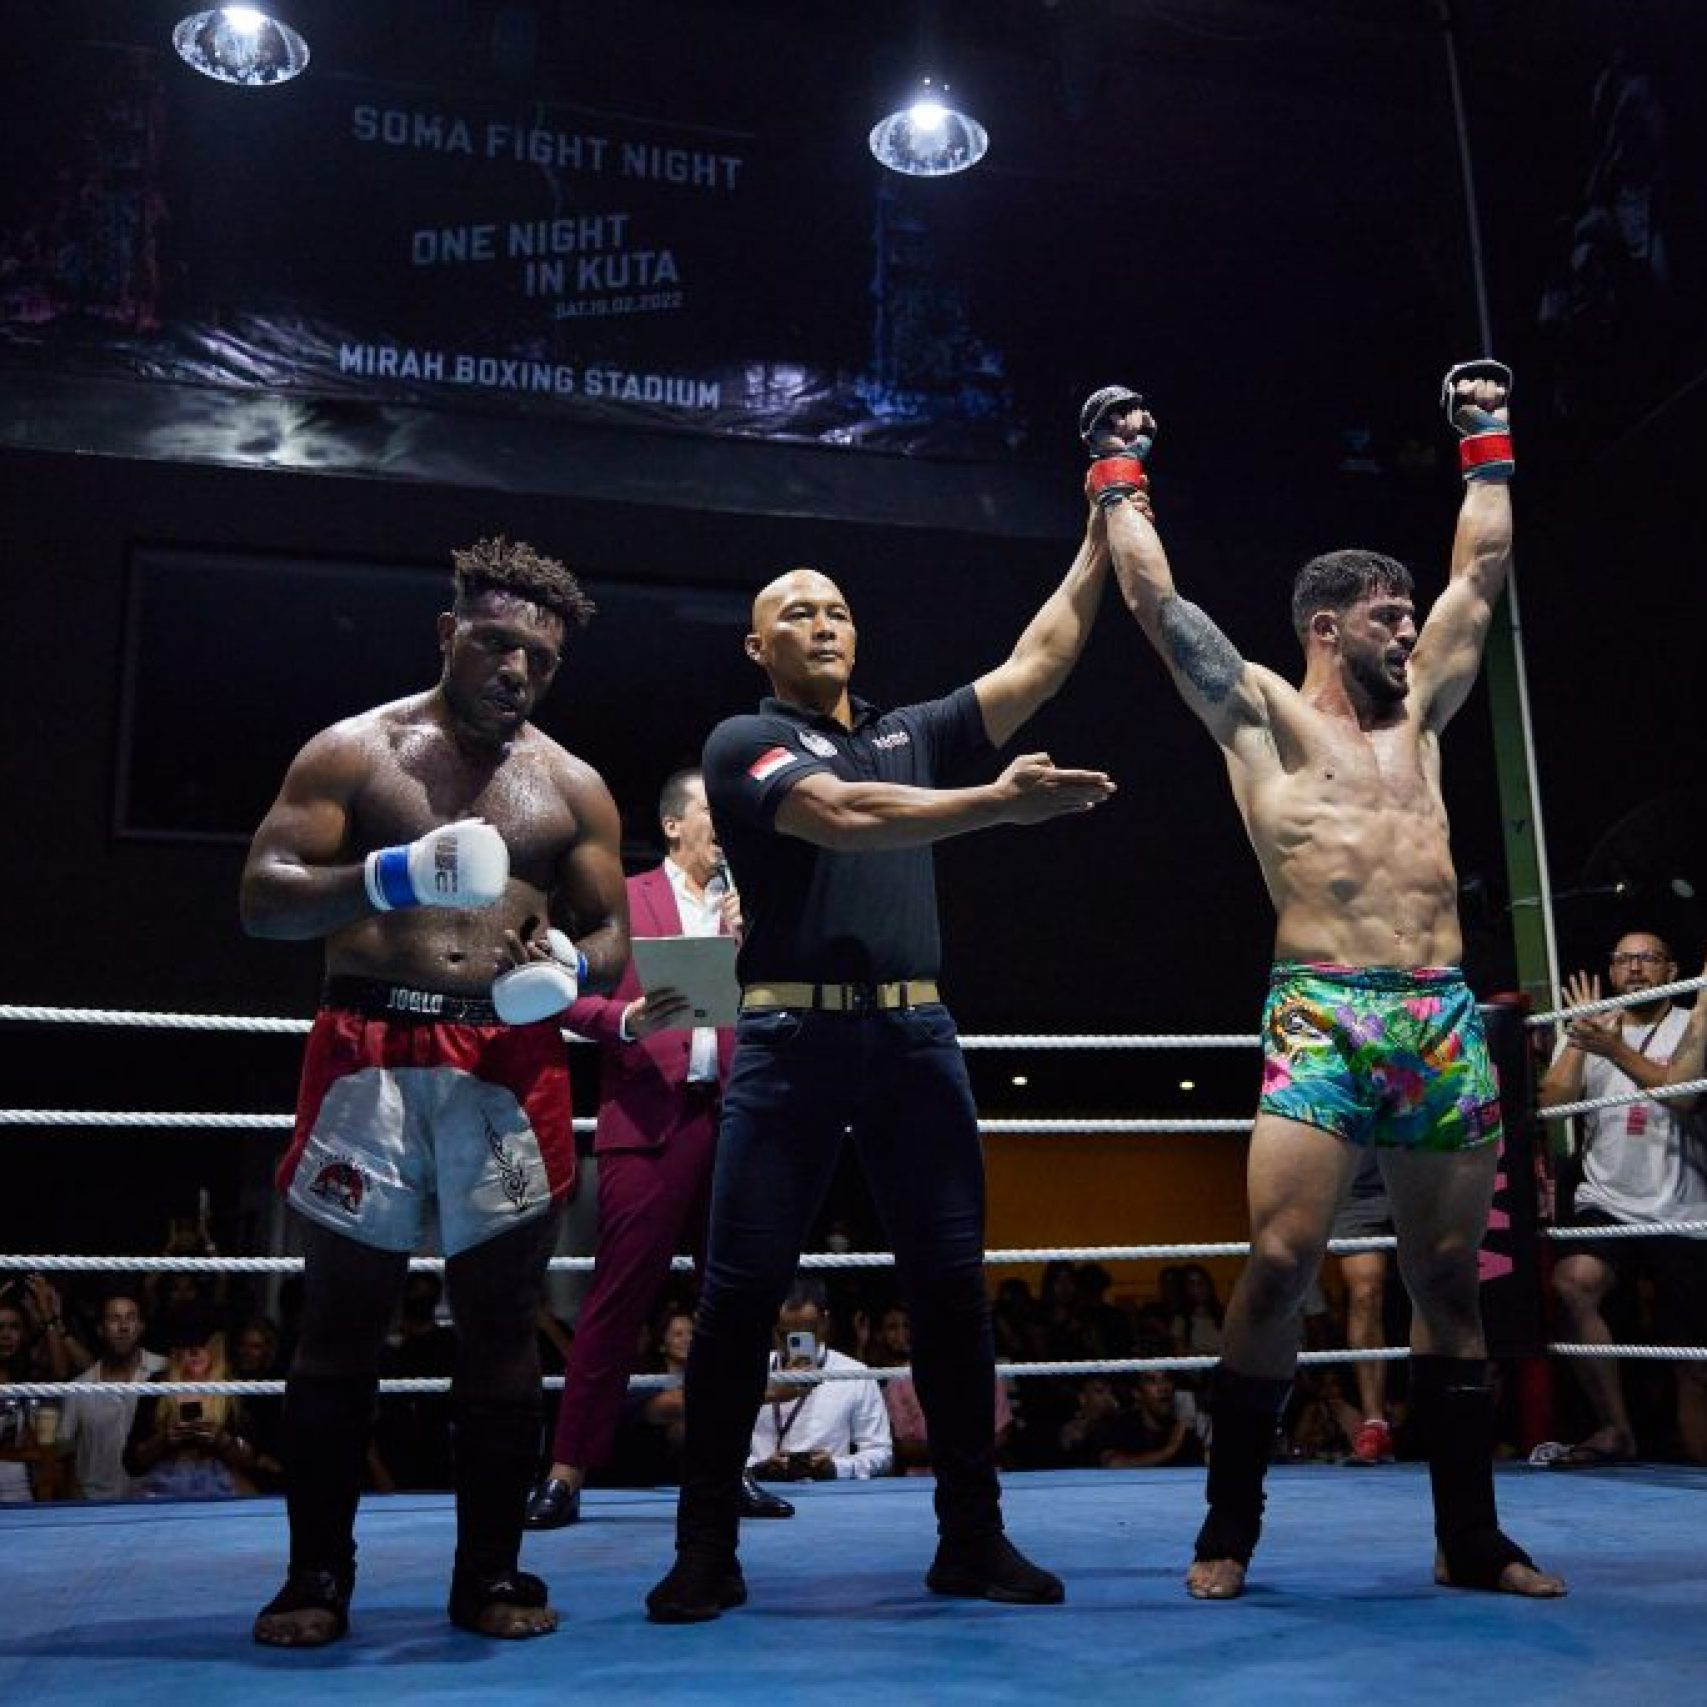 Bali hosted the Soma Fight Night ©GAMMA